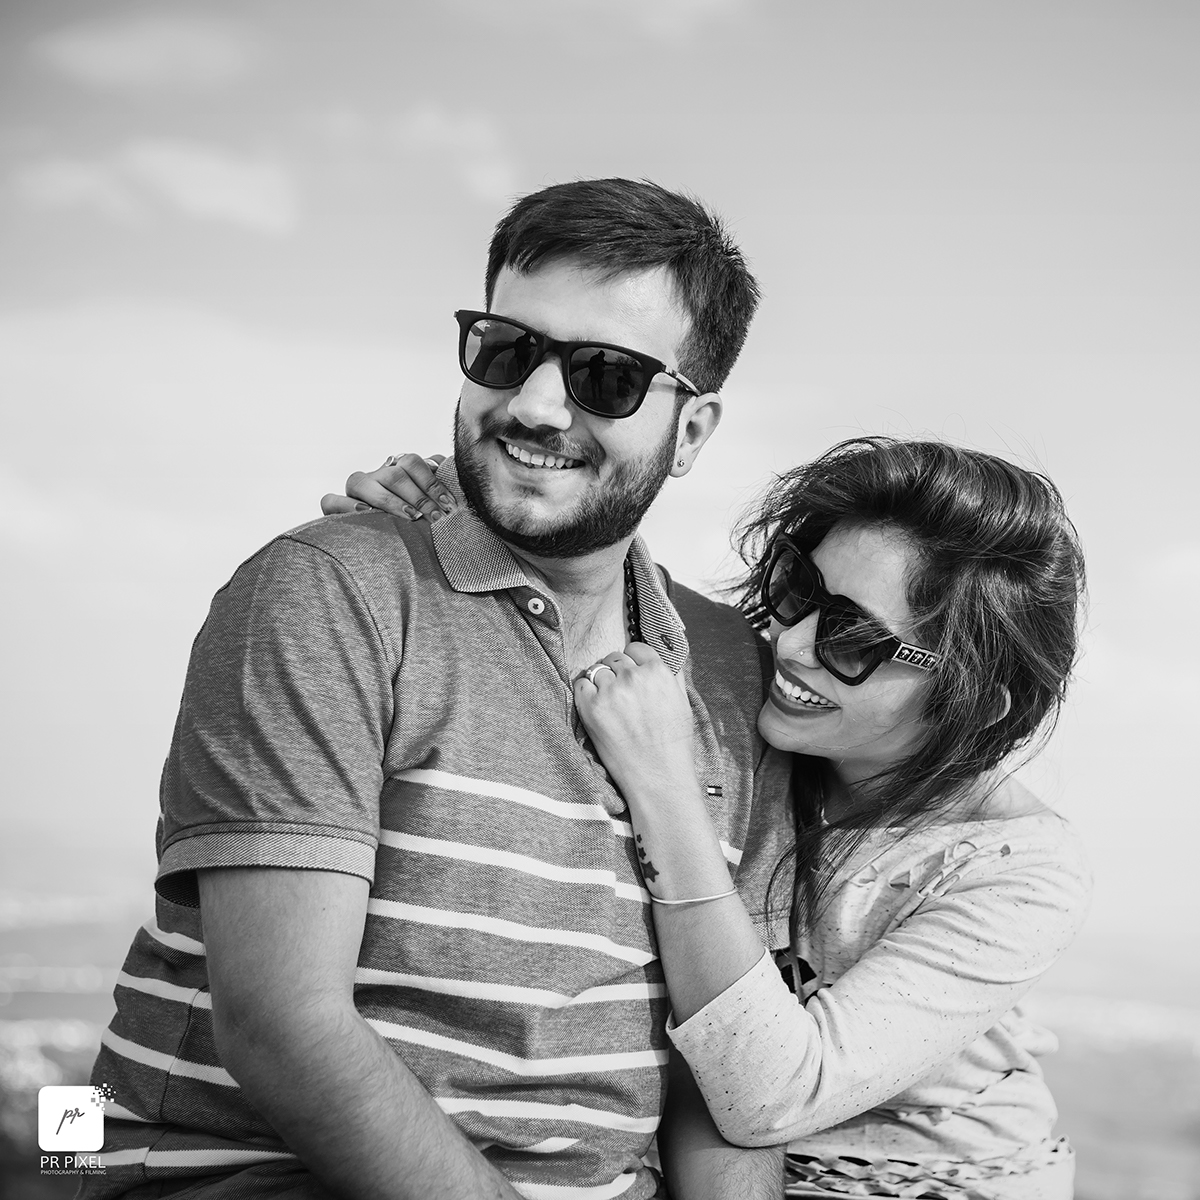 Candid Photography pre wedding photography Wedding Photography bride best photographer in Udaipur candid photographer in wedding photographer in